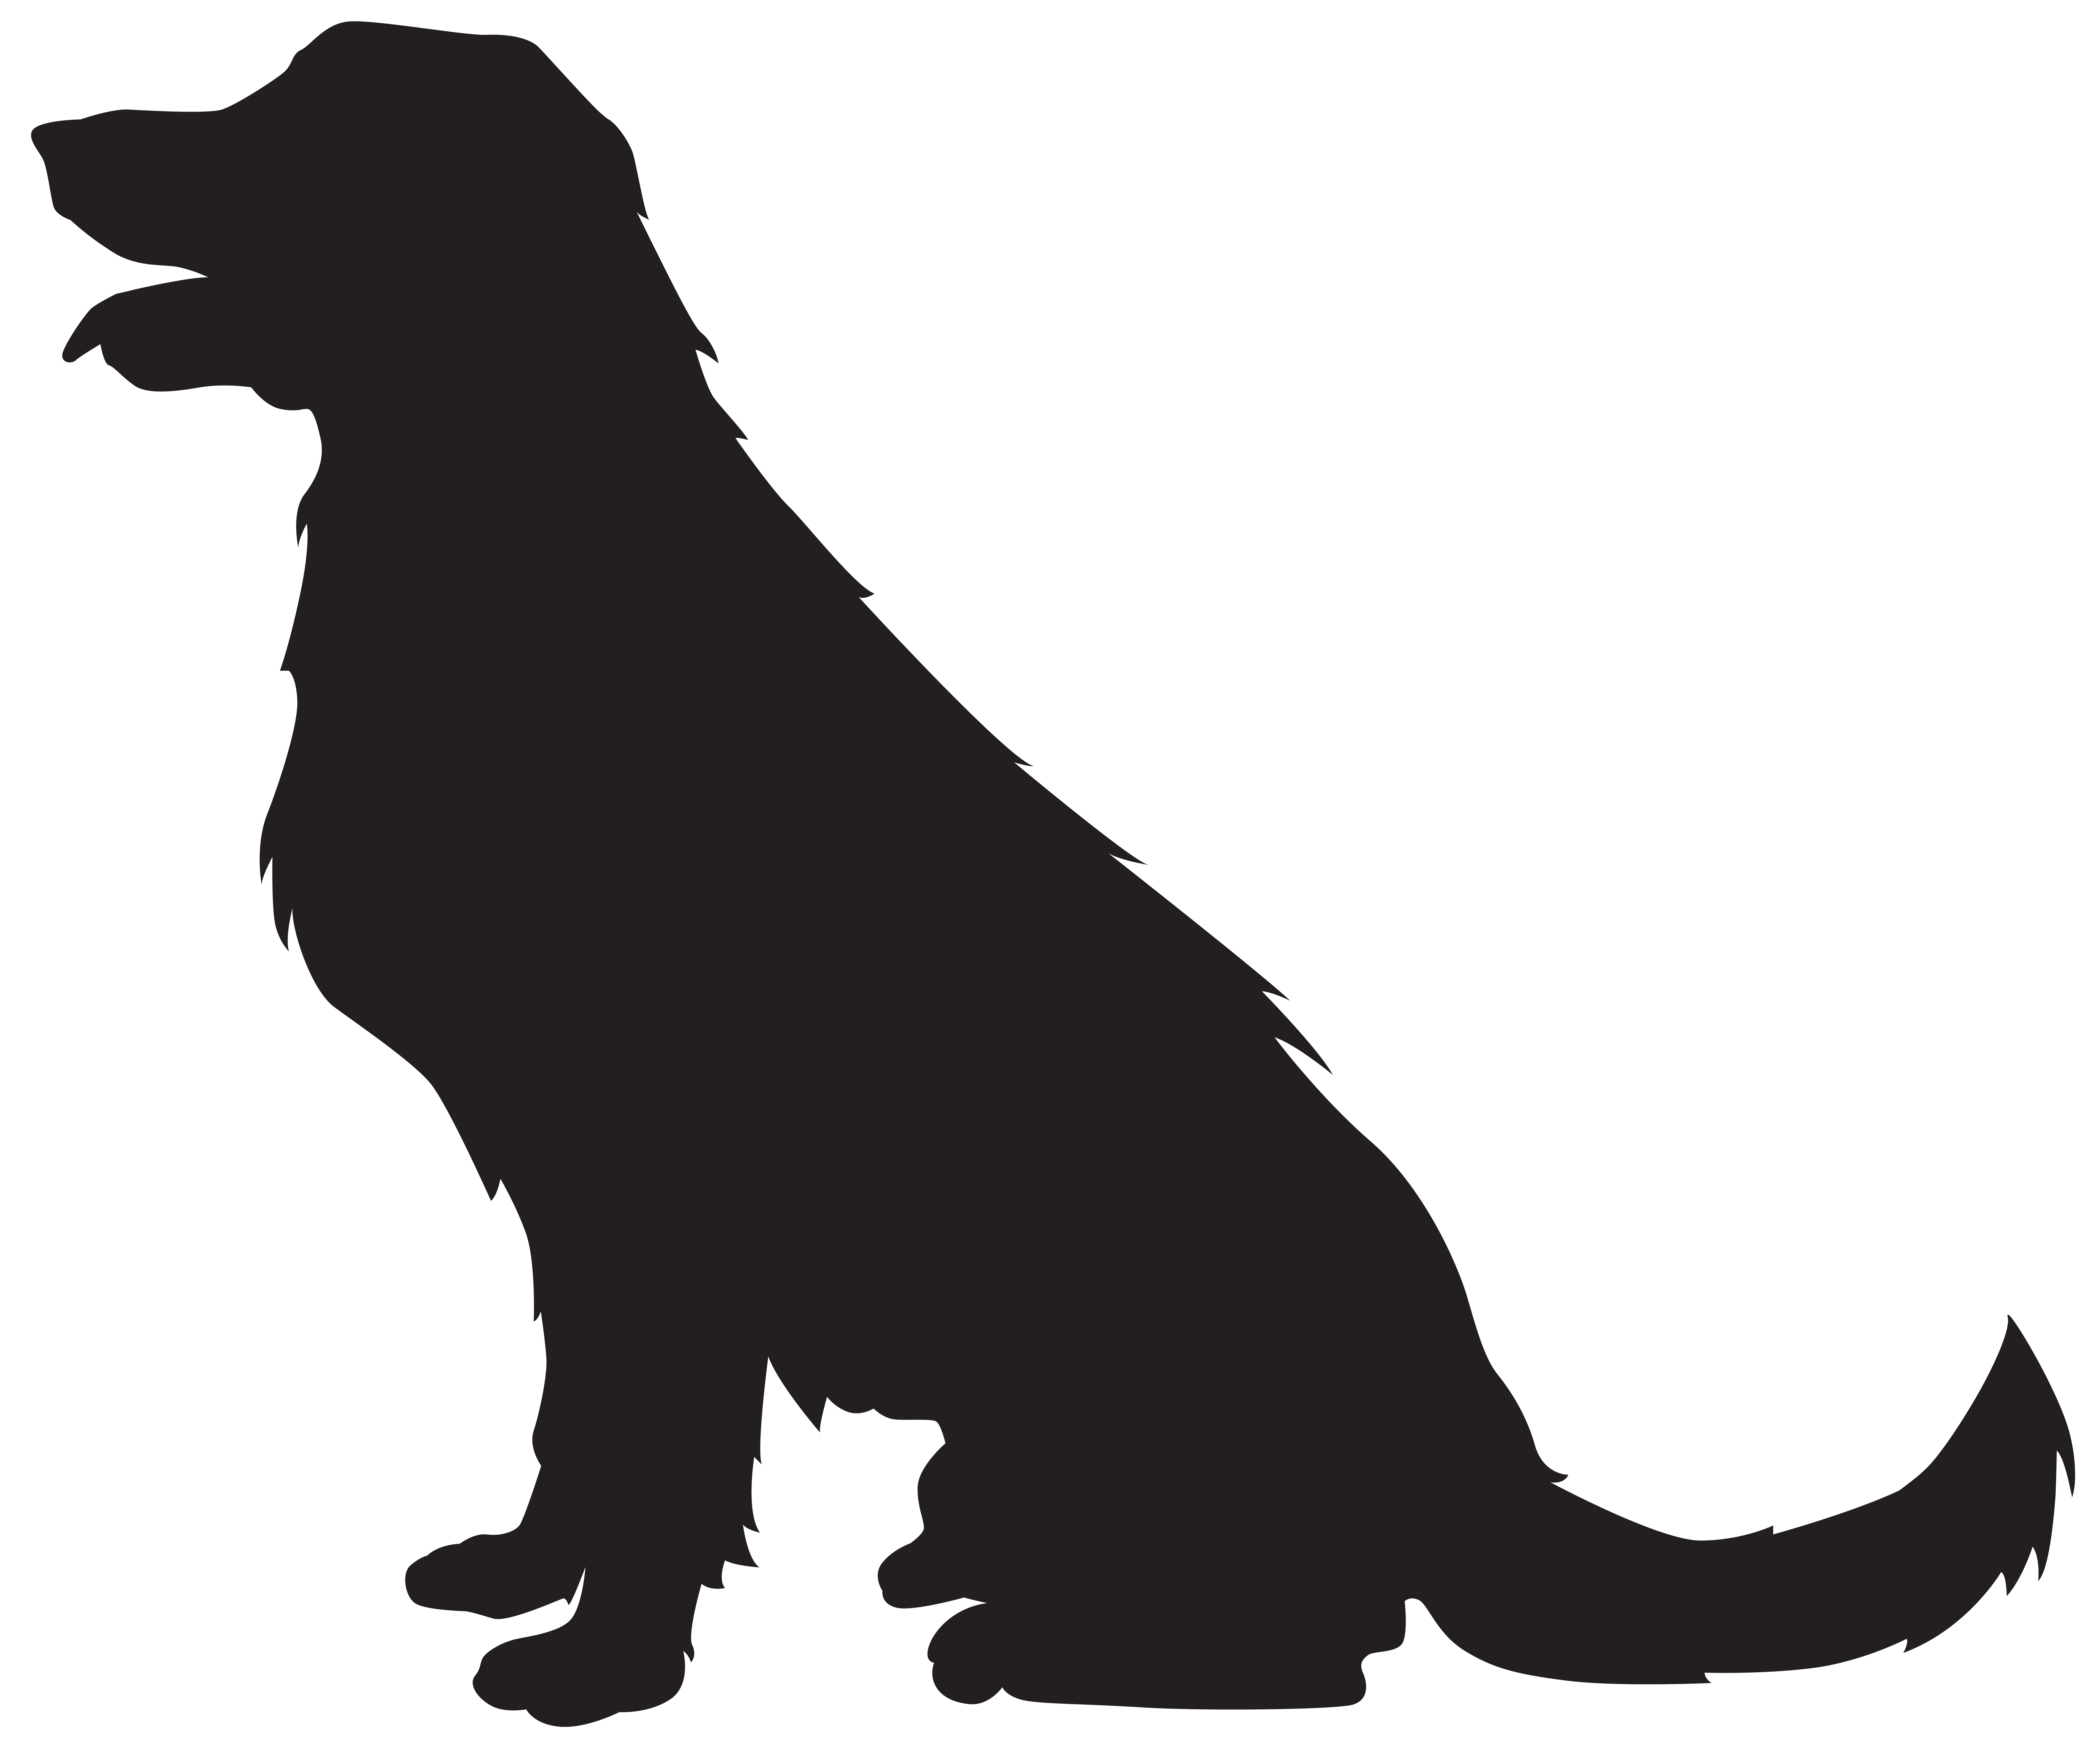 Free Dog Silhouette Png, Download Free Dog Silhouette Png png images